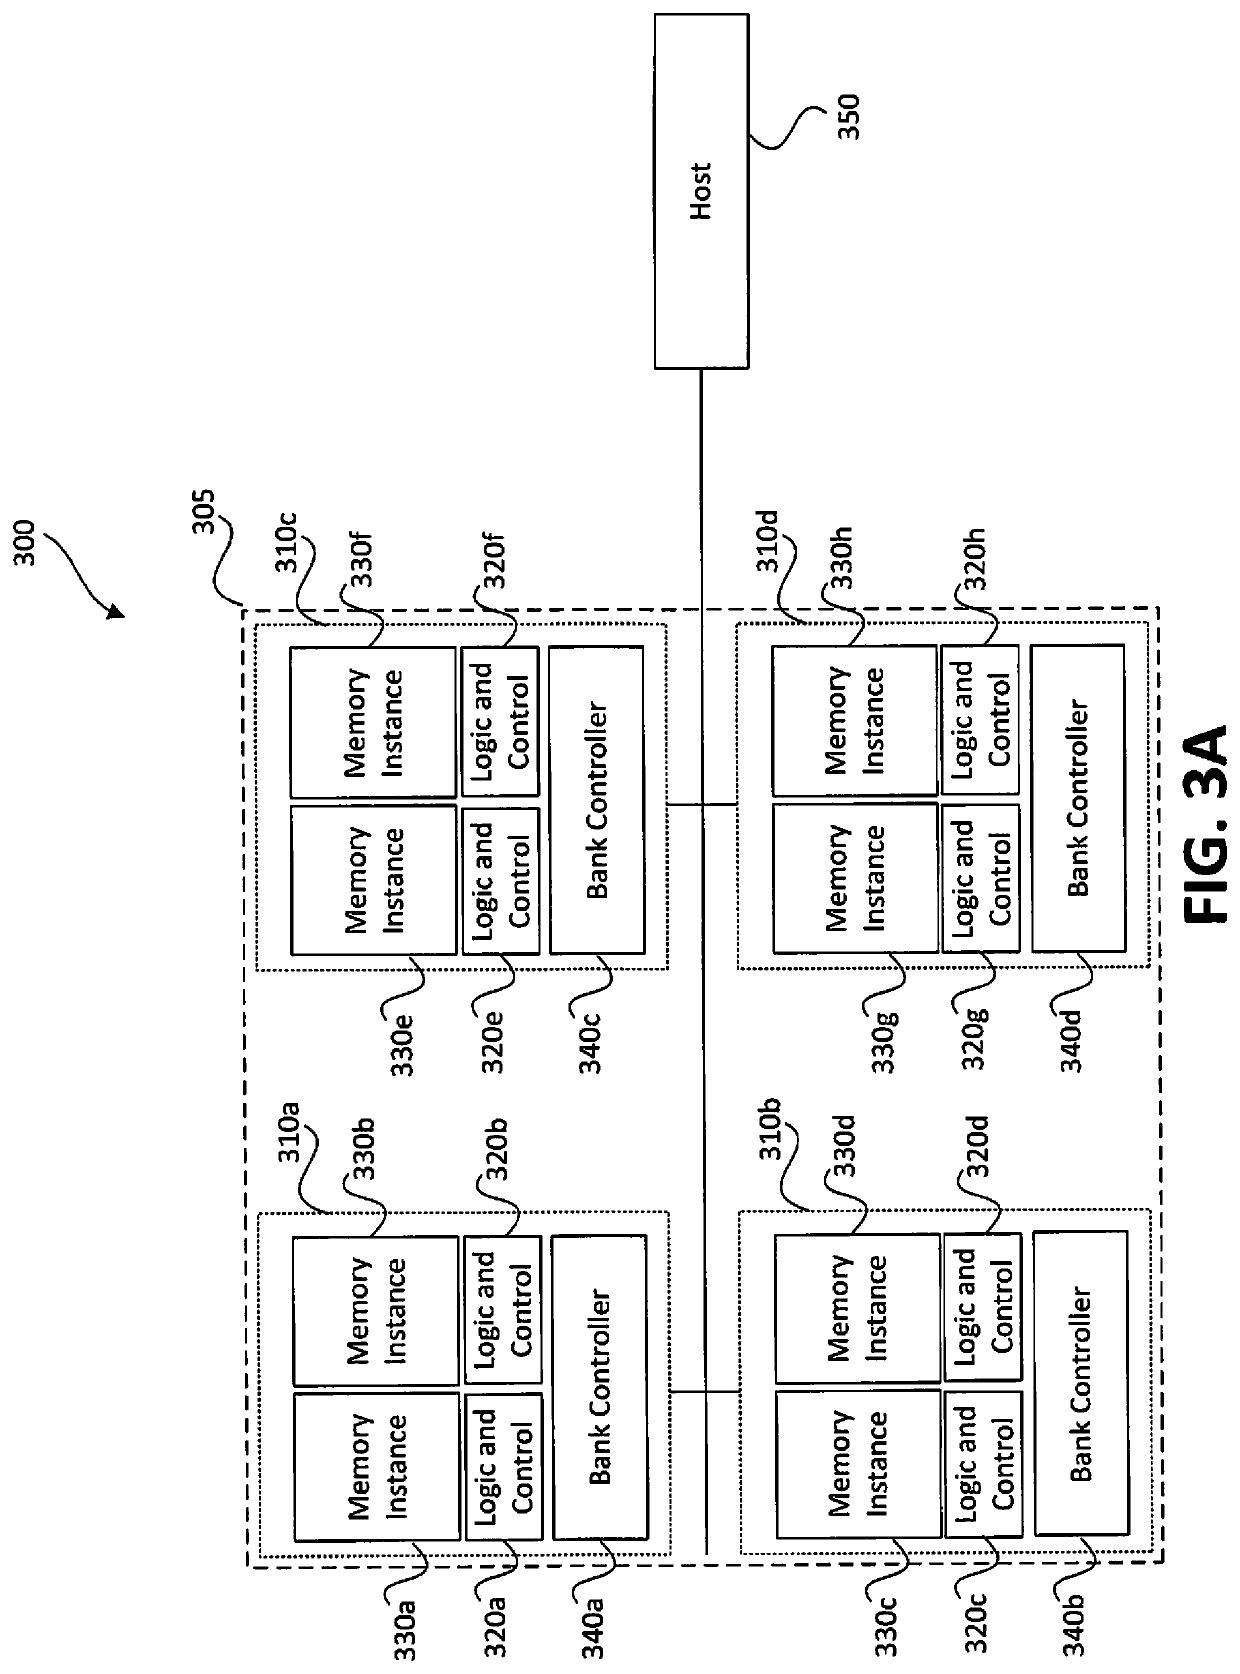 Memory-based distributed processor architecture